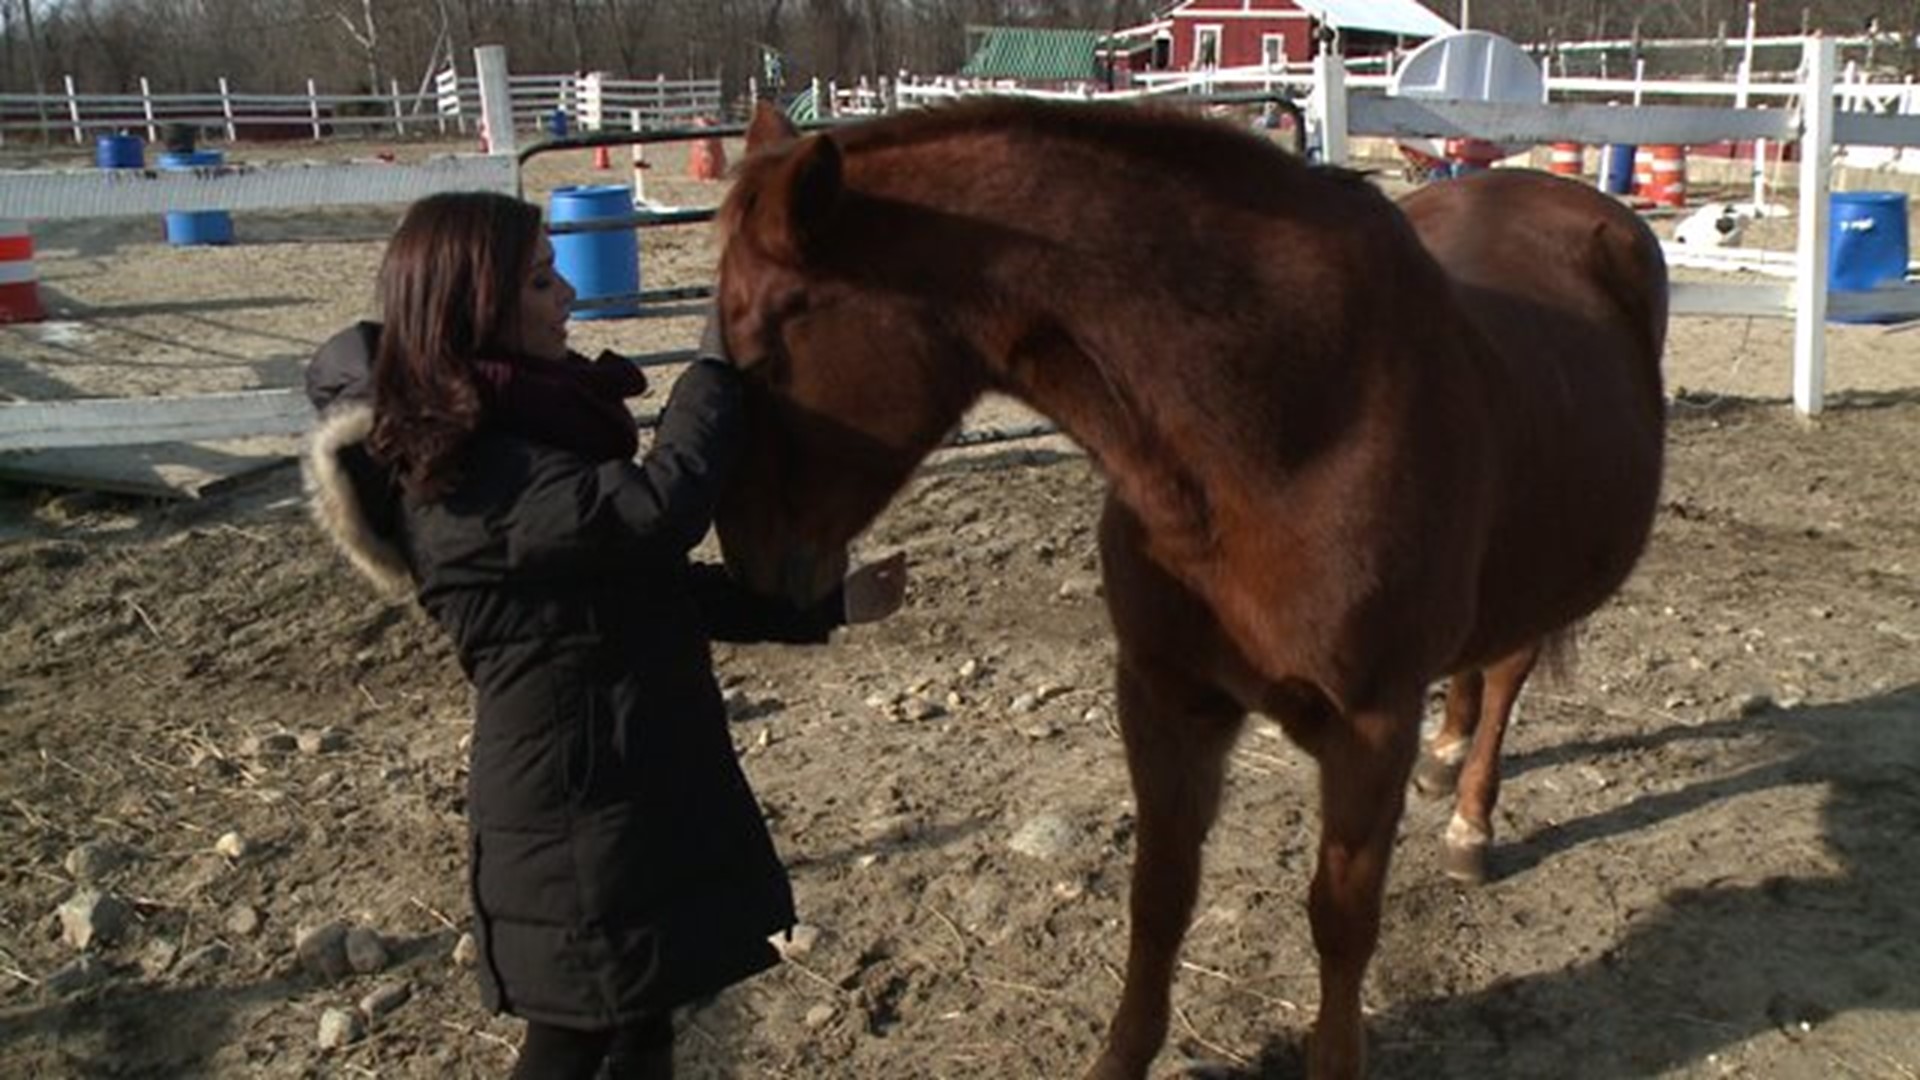 Farm that rescuses neglected, abused animals asking for help